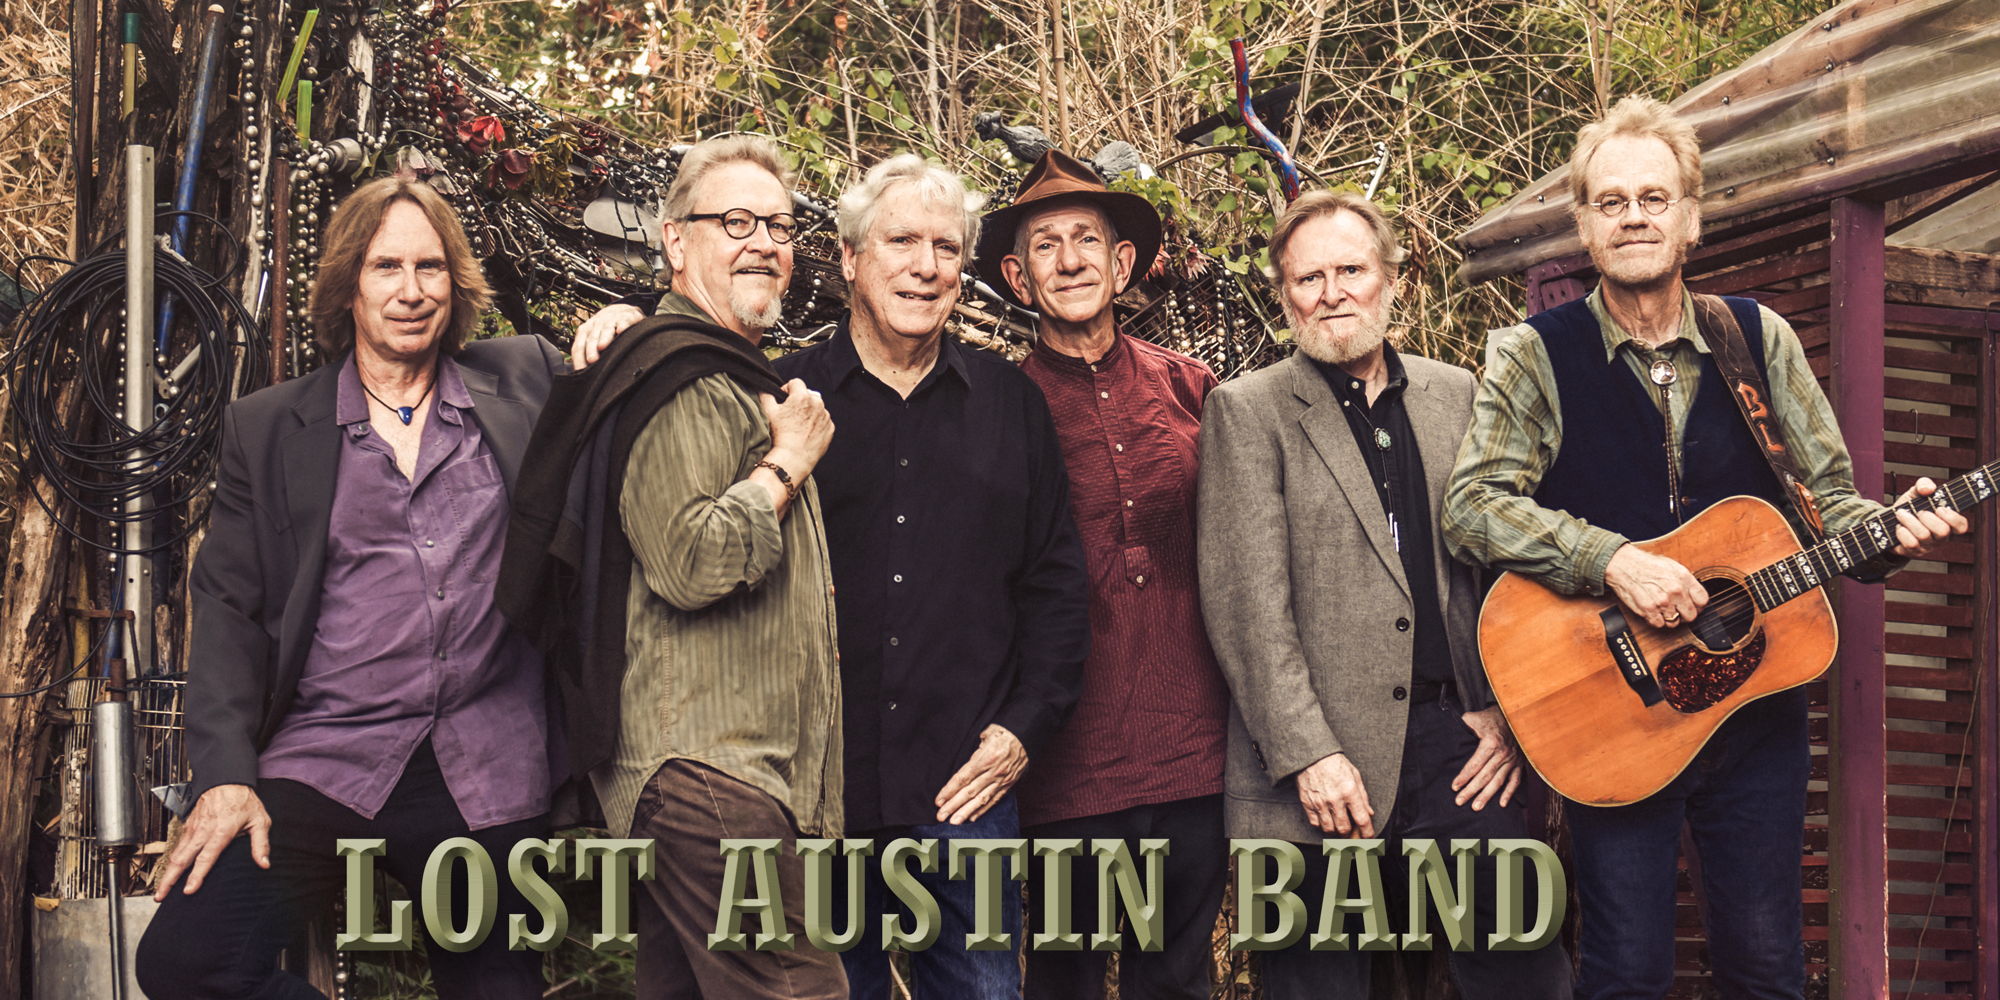 Lost Austin Band at Gruene Hall promotional image